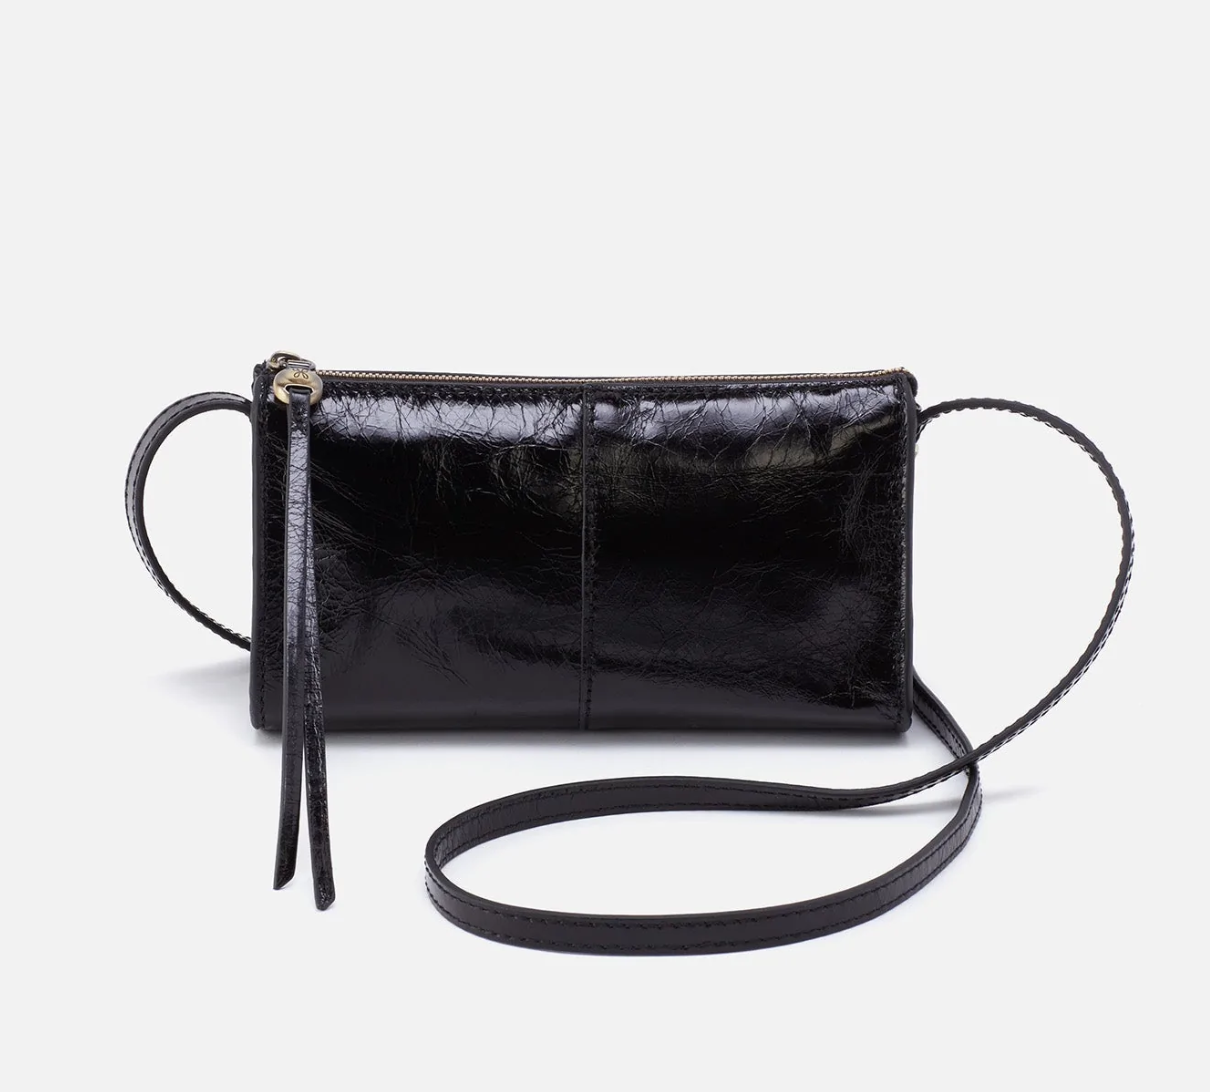 The Jewel in black by HOBO is a small crossbody designed to hold the essentials. It has a compact size with enough space for your phone, keys and cards. Check it out at the Painted Cottage in Edgewater, MD